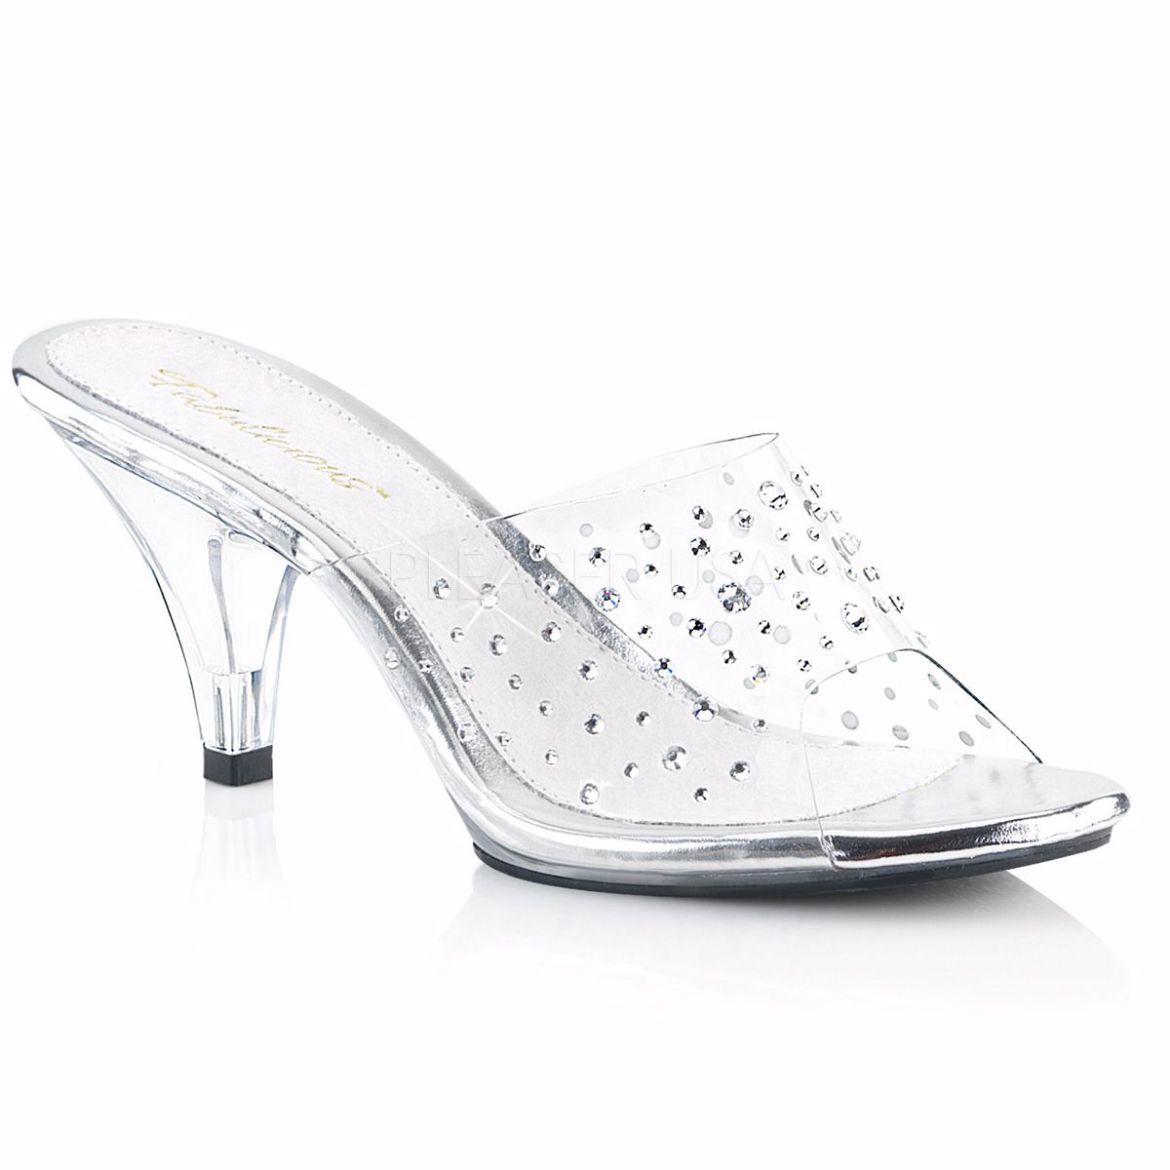 Product image of Fabulicious Belle-301Rs Clear/Clear, 3 inch (7.6 cm) Heel, 1/8 inch (0.3 cm) Platform Slide Mule Shoes